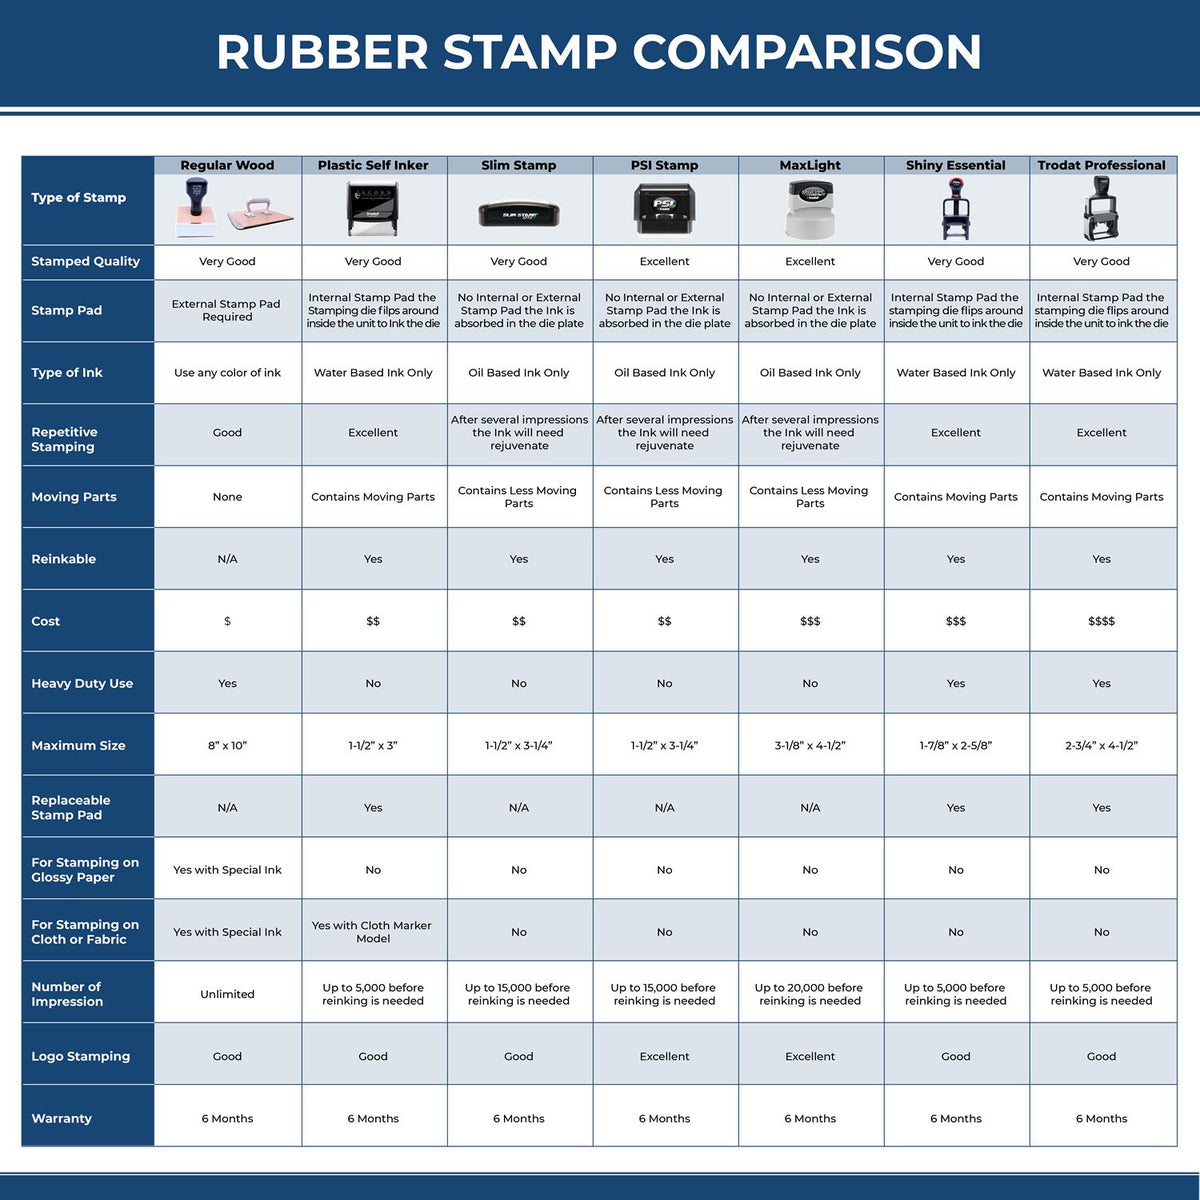 A comparison chart for the different types of mount models available for the MaxLight Premium Pre-Inked Illinois Rectangular Notarial Stamp.